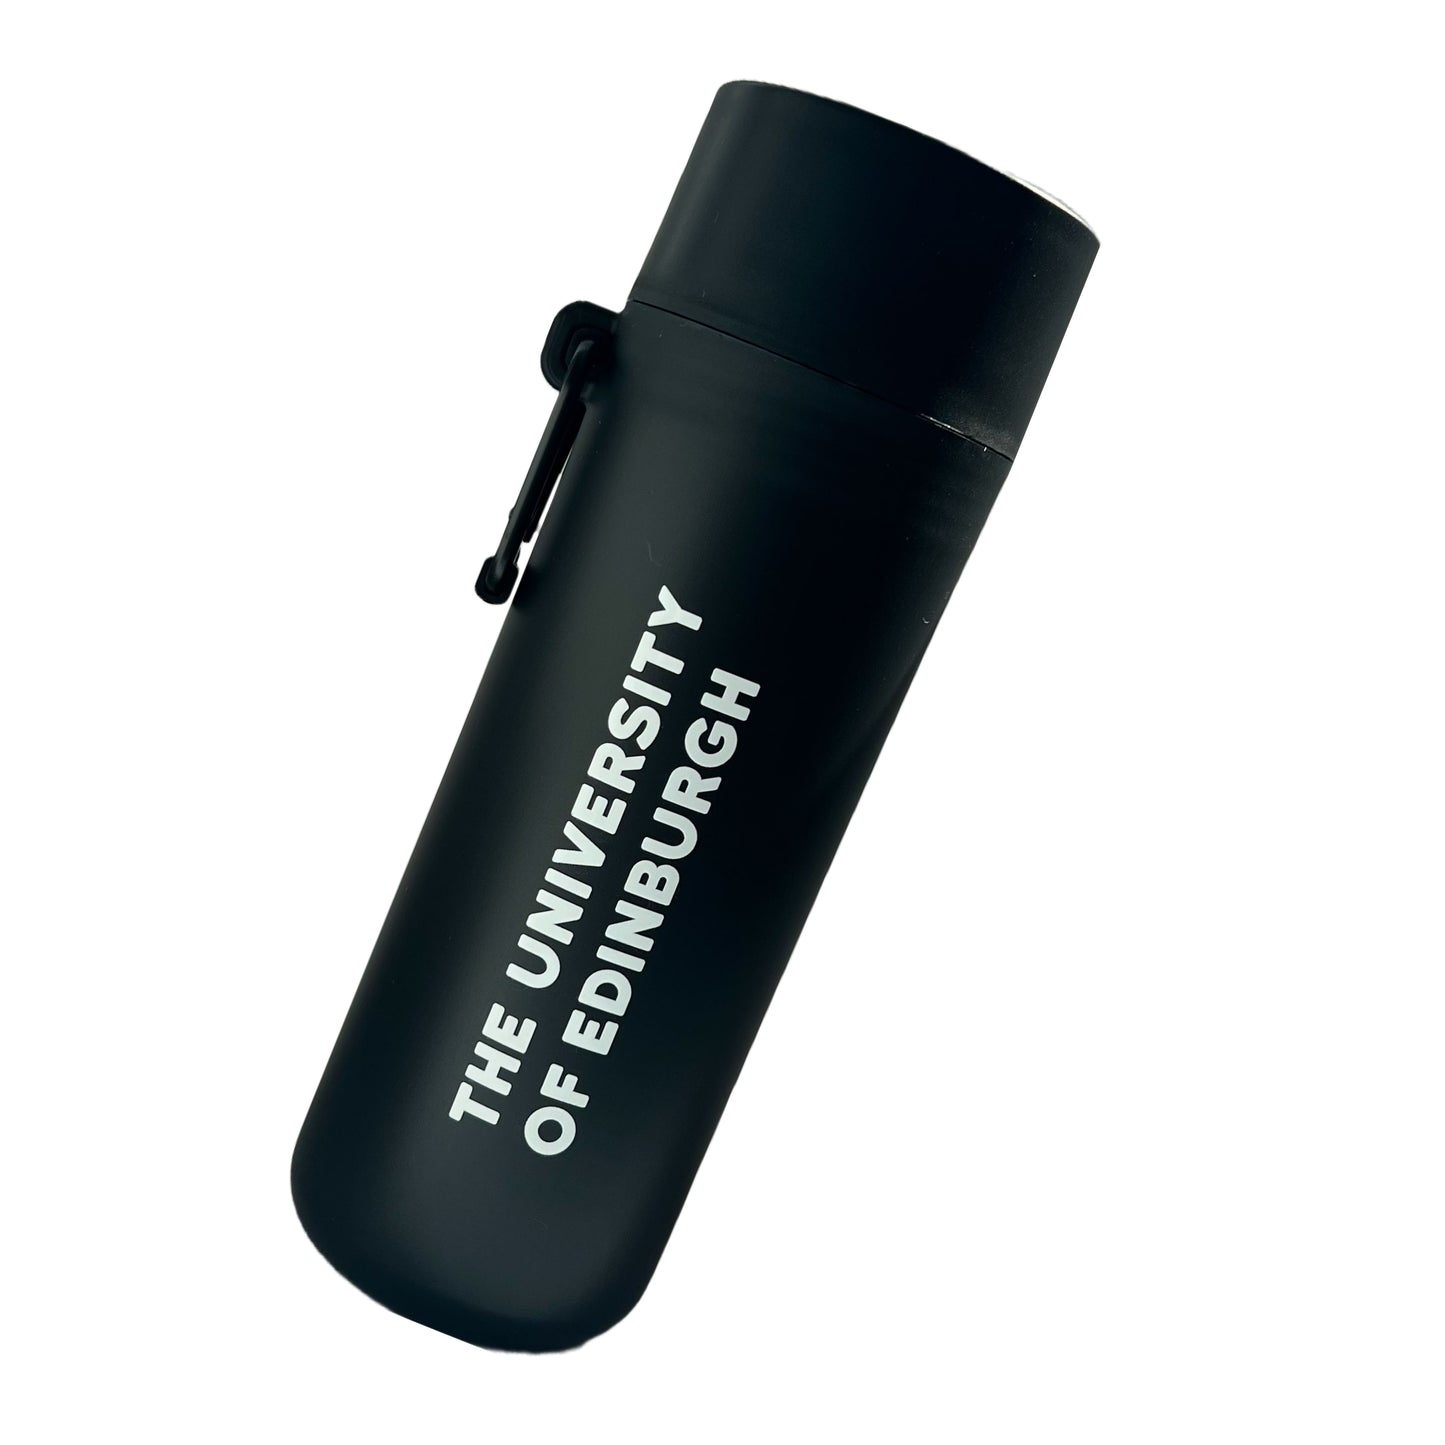 Swheat Water Bottle in Black with University of Edinburgh text in white.